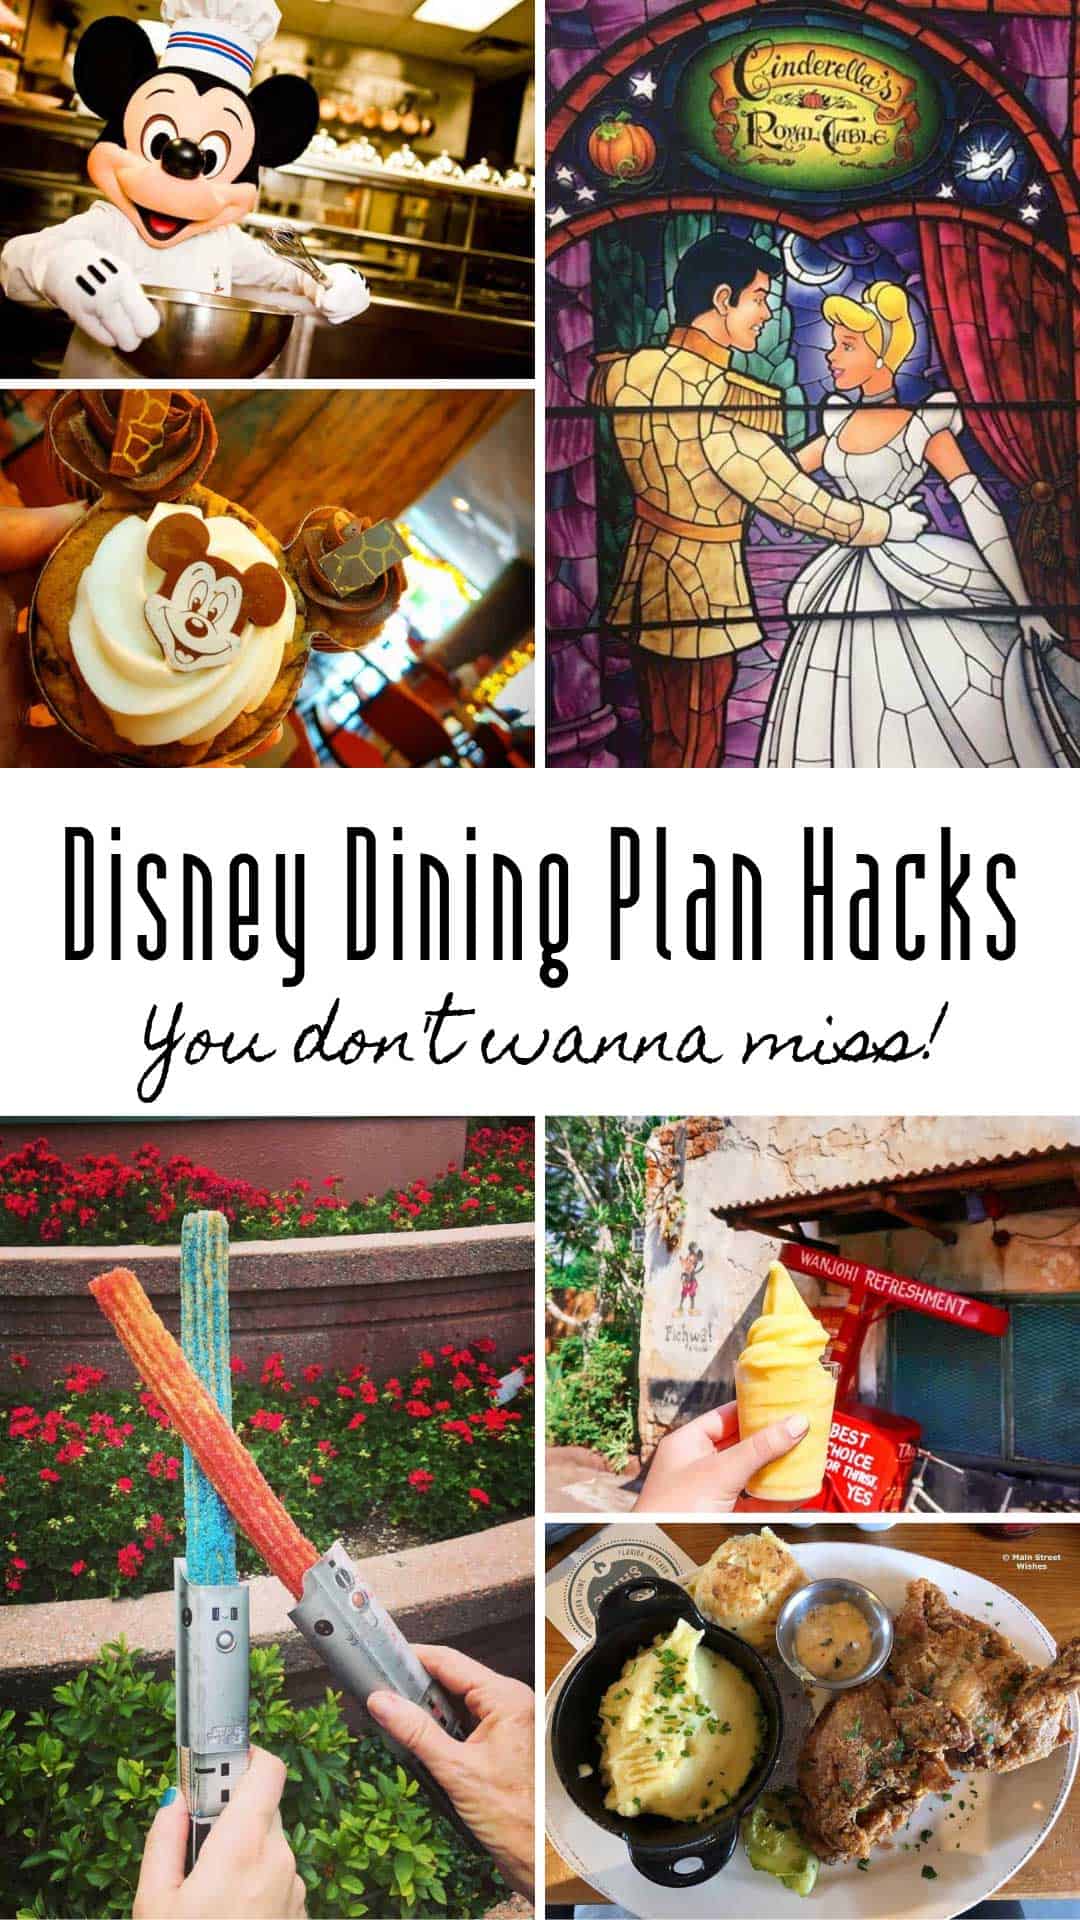 If you want to know how to get the most value for money out of your Disney meal plan you gotta read these hacks